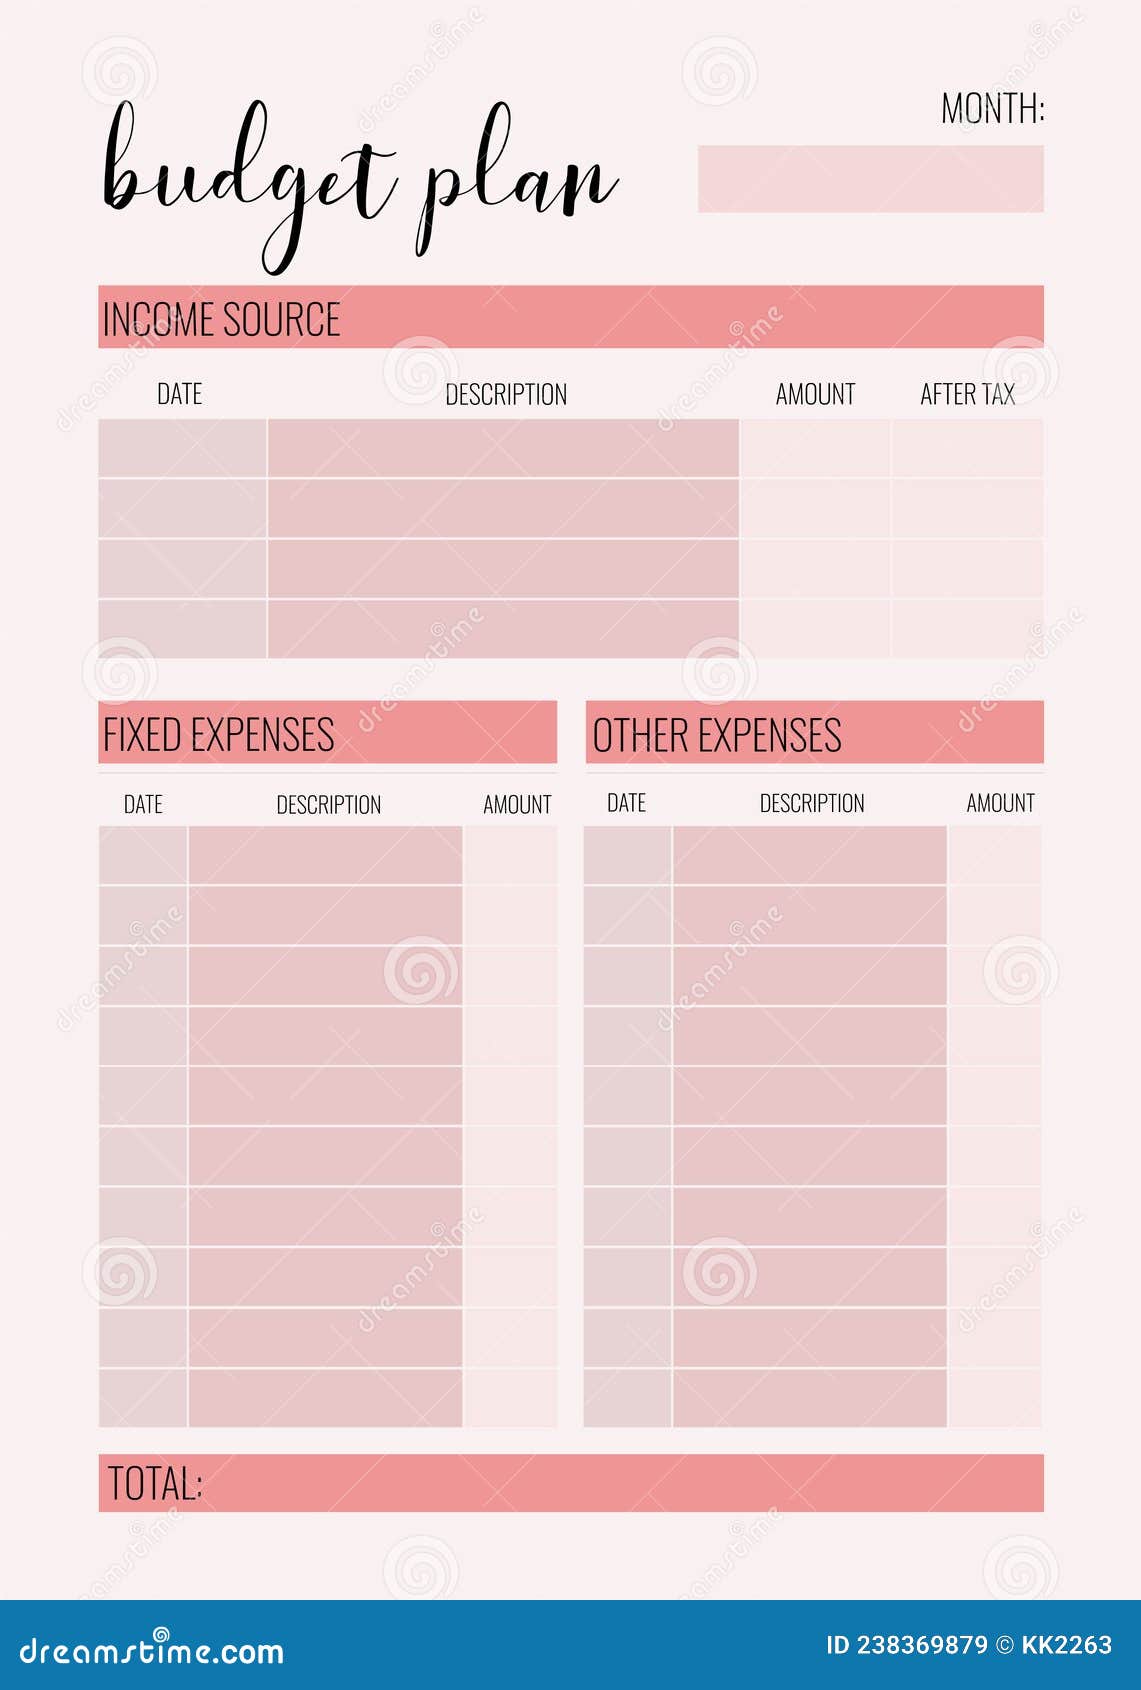 Personal Monthly Budget Planner Stock Vector - Illustration of